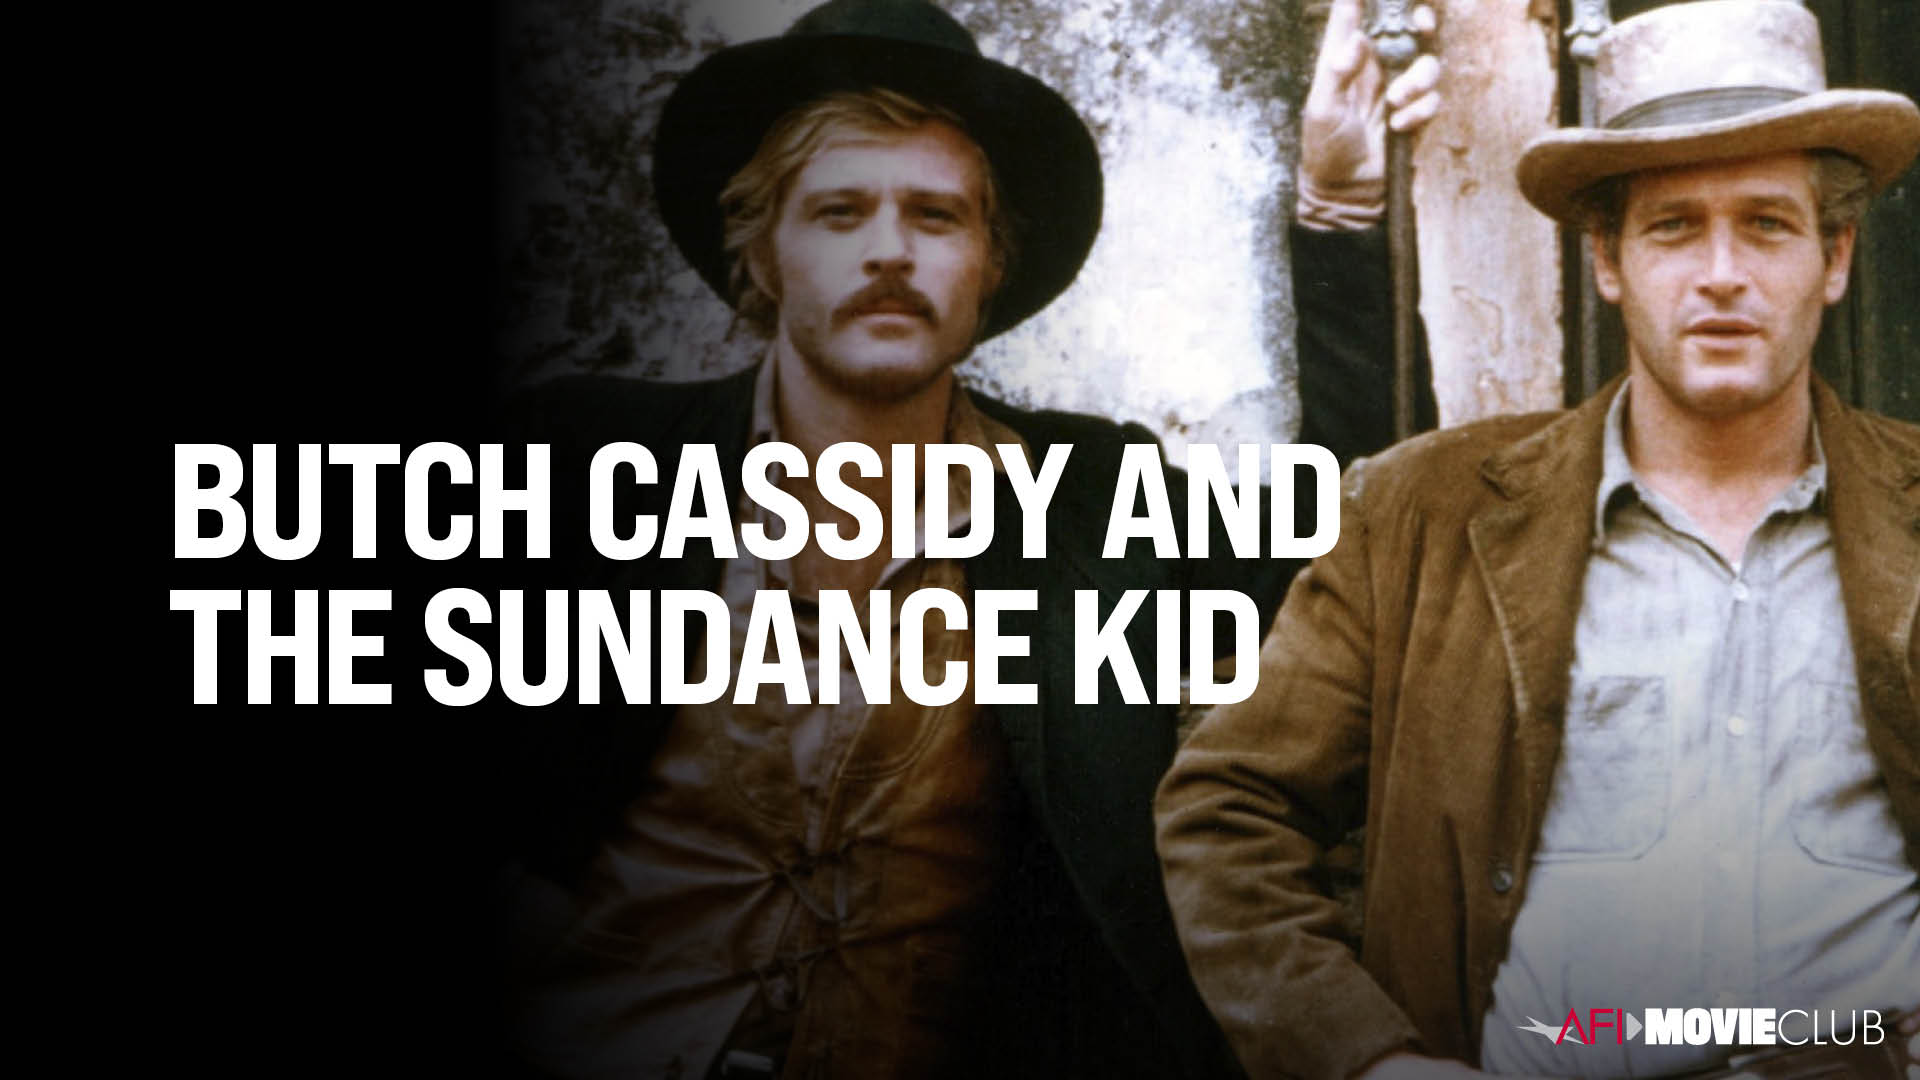 Butch Cassidy And The Sundance Kid Film Still - Paul Newman and Robert Redford